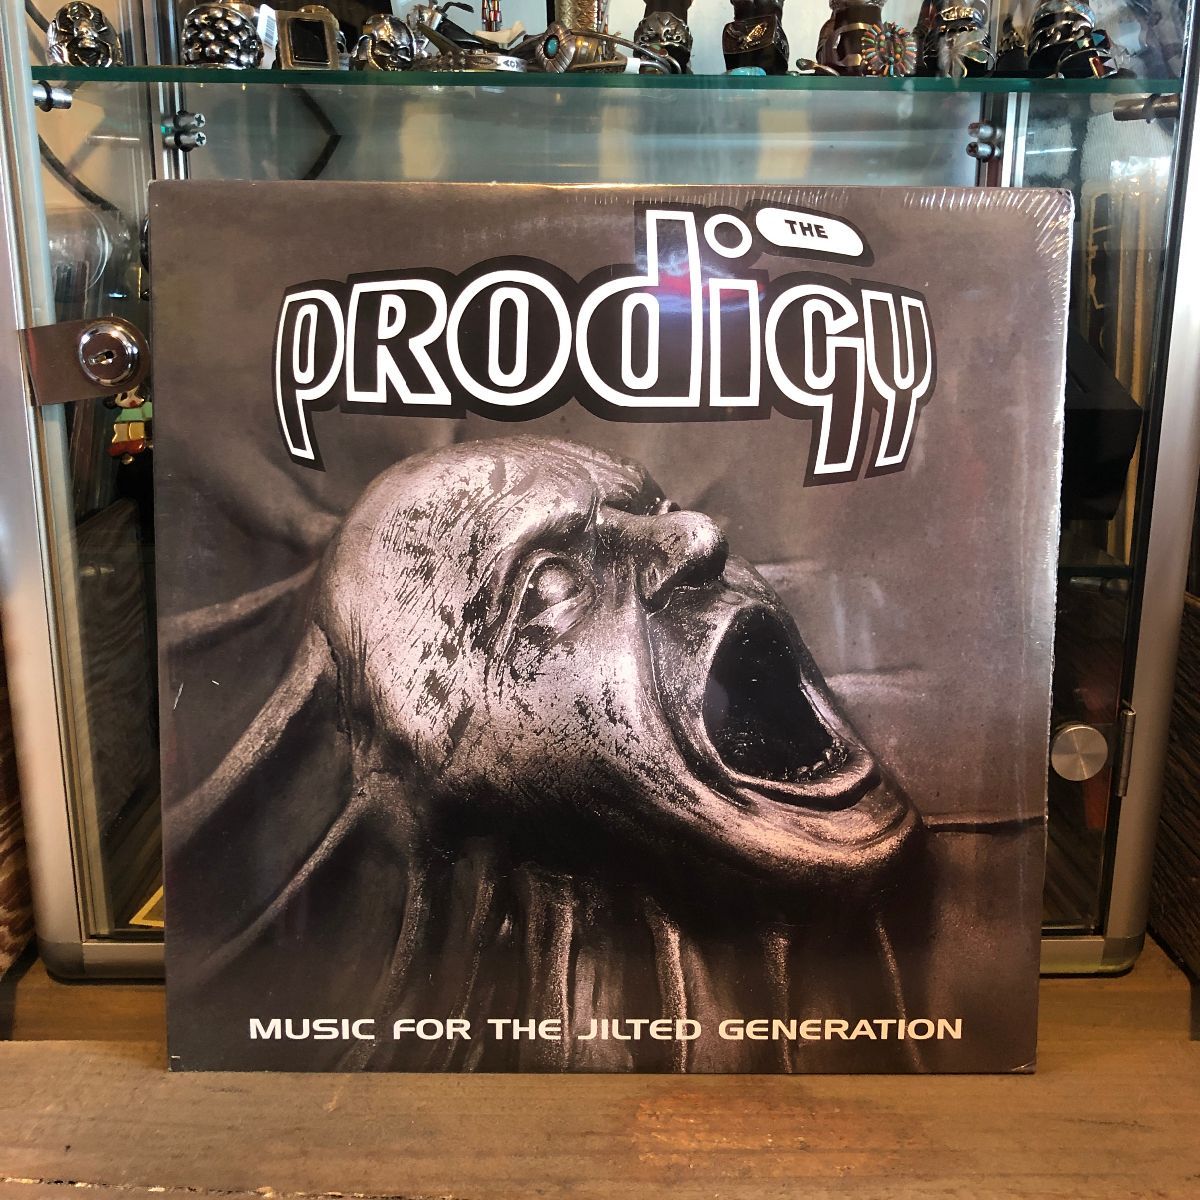 Music for the jilted generation. Music for the jilted Generation the Prodigy. The Prodigy Music for the jilted Generation Vinyl. Prodigy Music for the jilted Generation 1994 [Vinyl Rip].